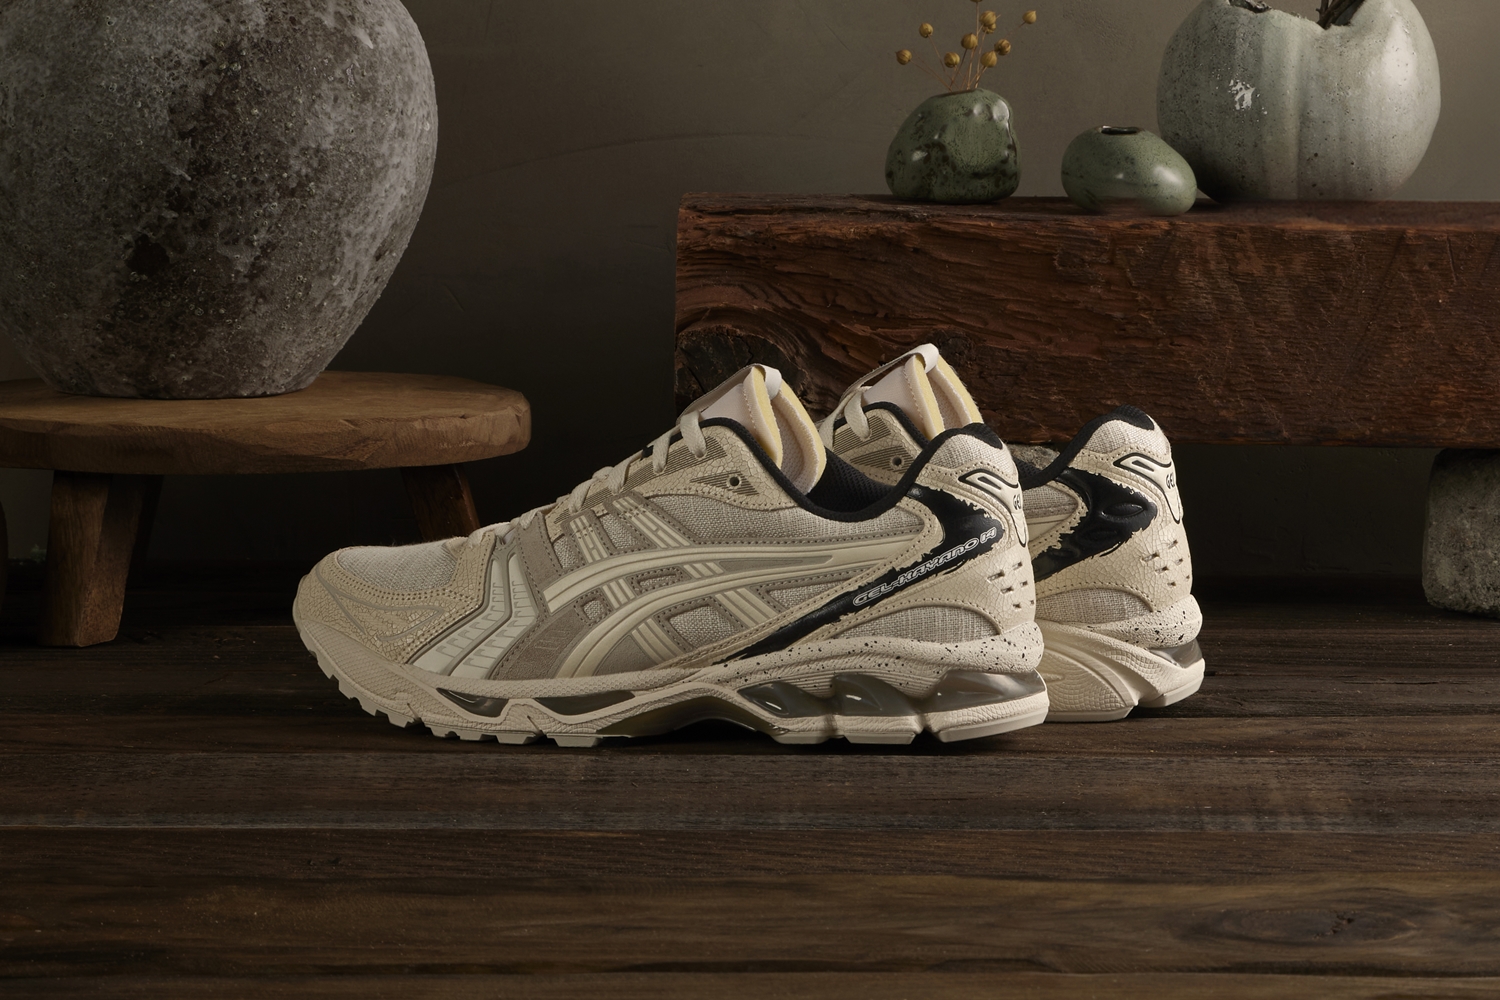 ASICS IMPERFECTION PACK GT-2160 & GEL-KAYANO 14 3月22日発売予定